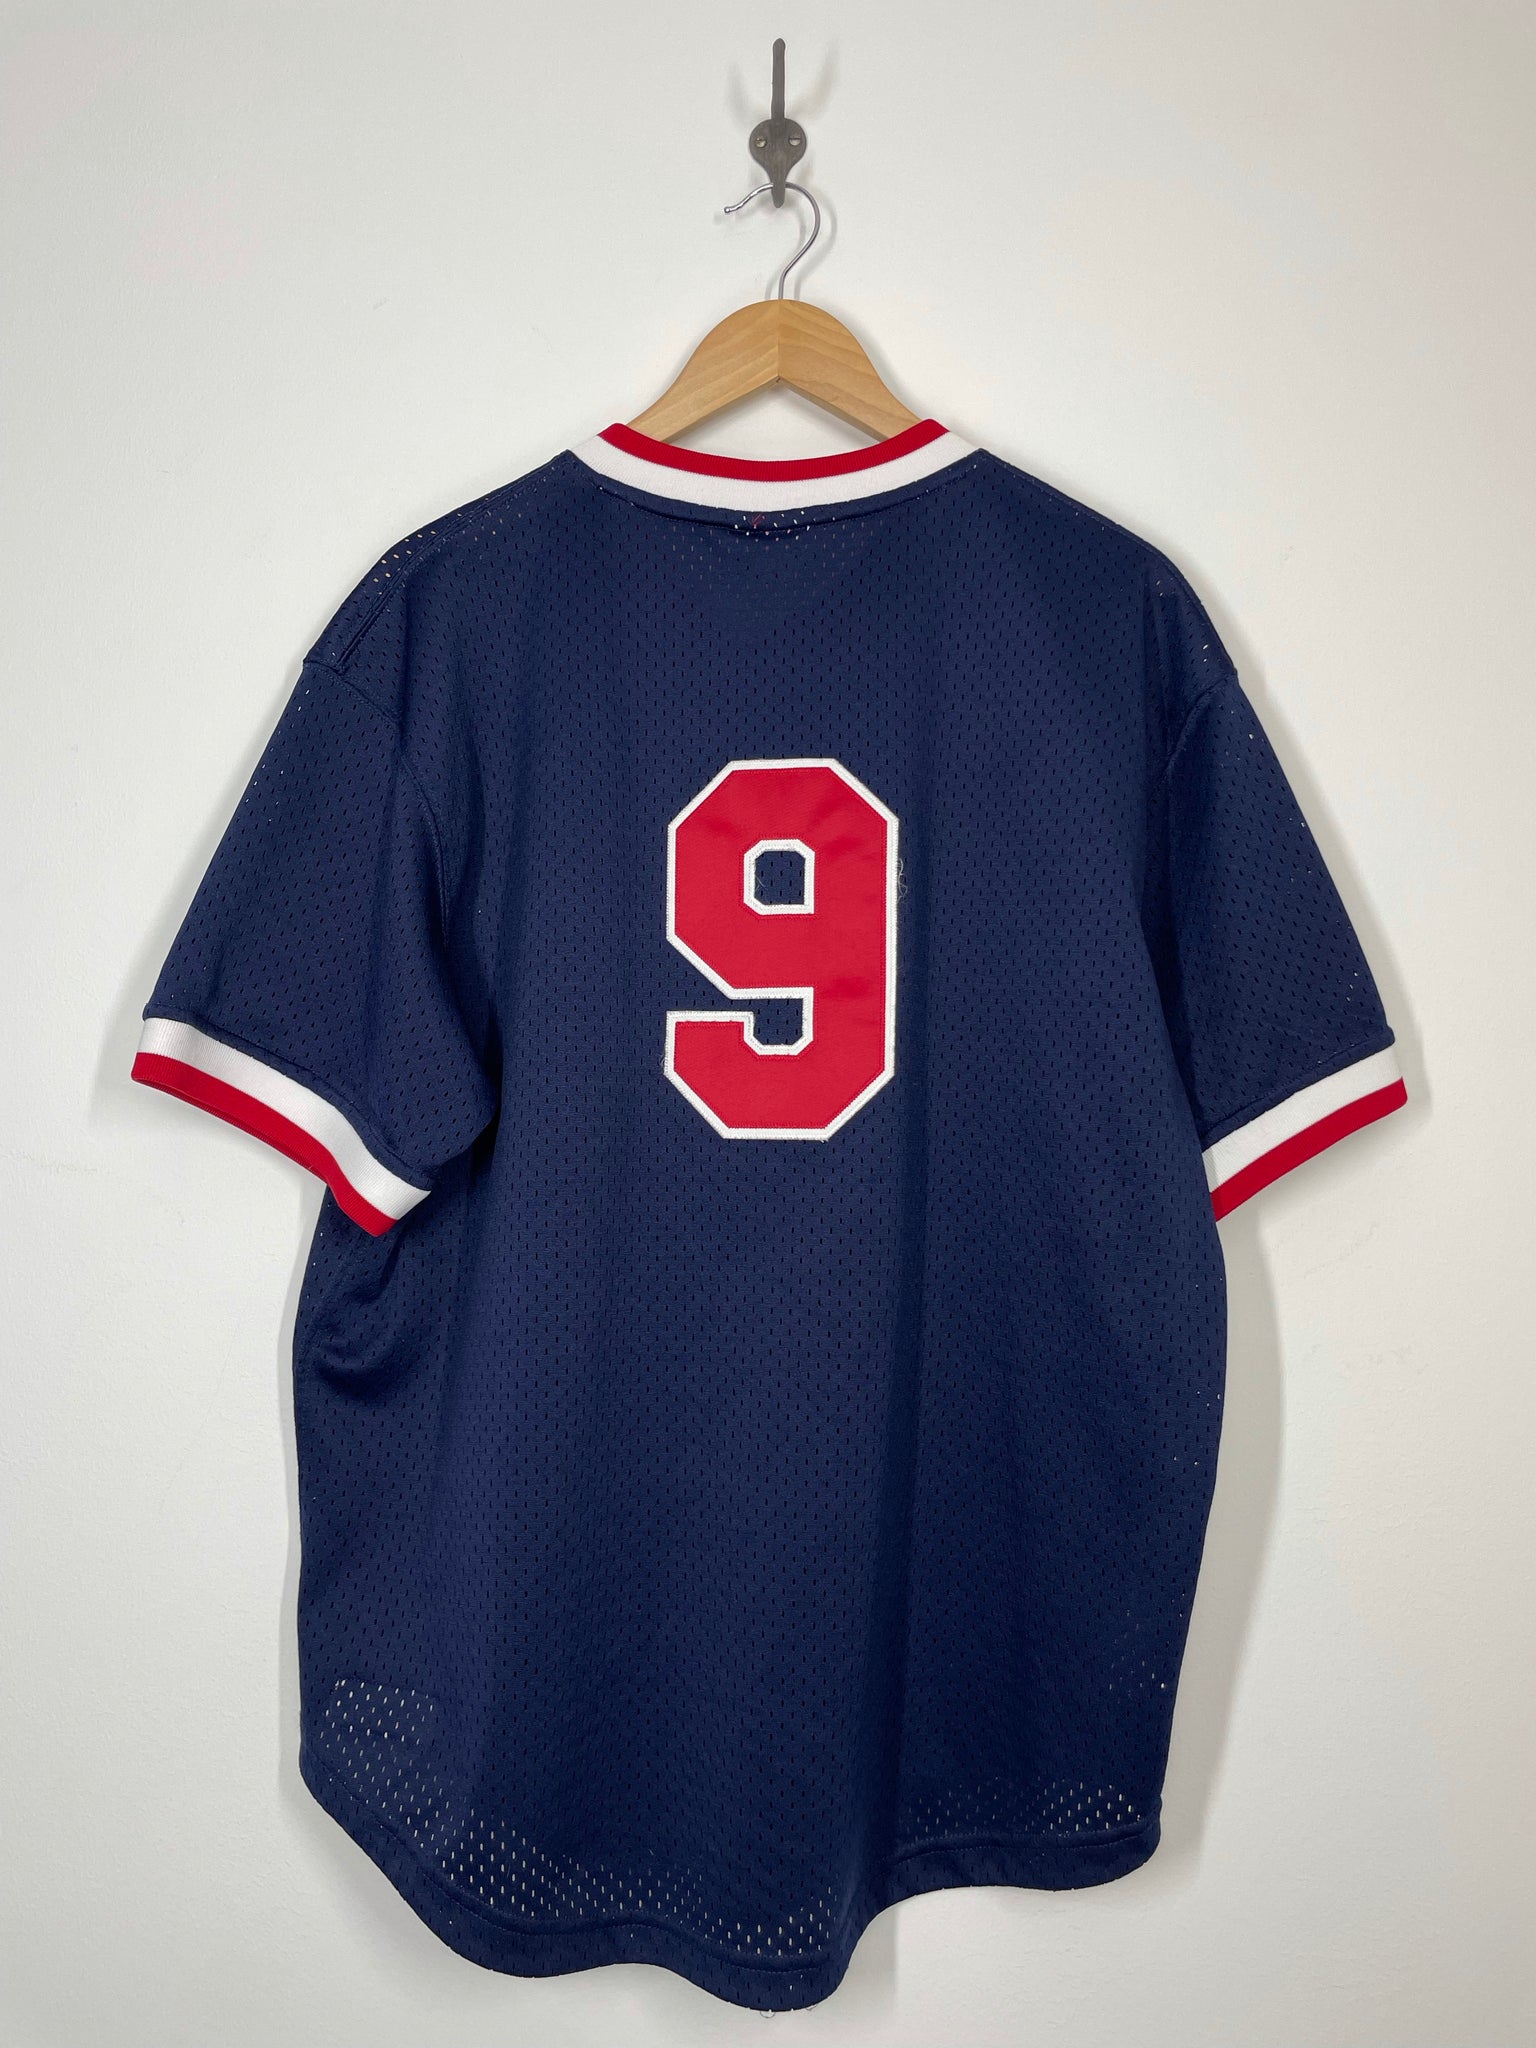 MLB Boston Red Sox Baseball Ted Williams 9 Cooperstown Jersey - Mitchell & Ness - XL